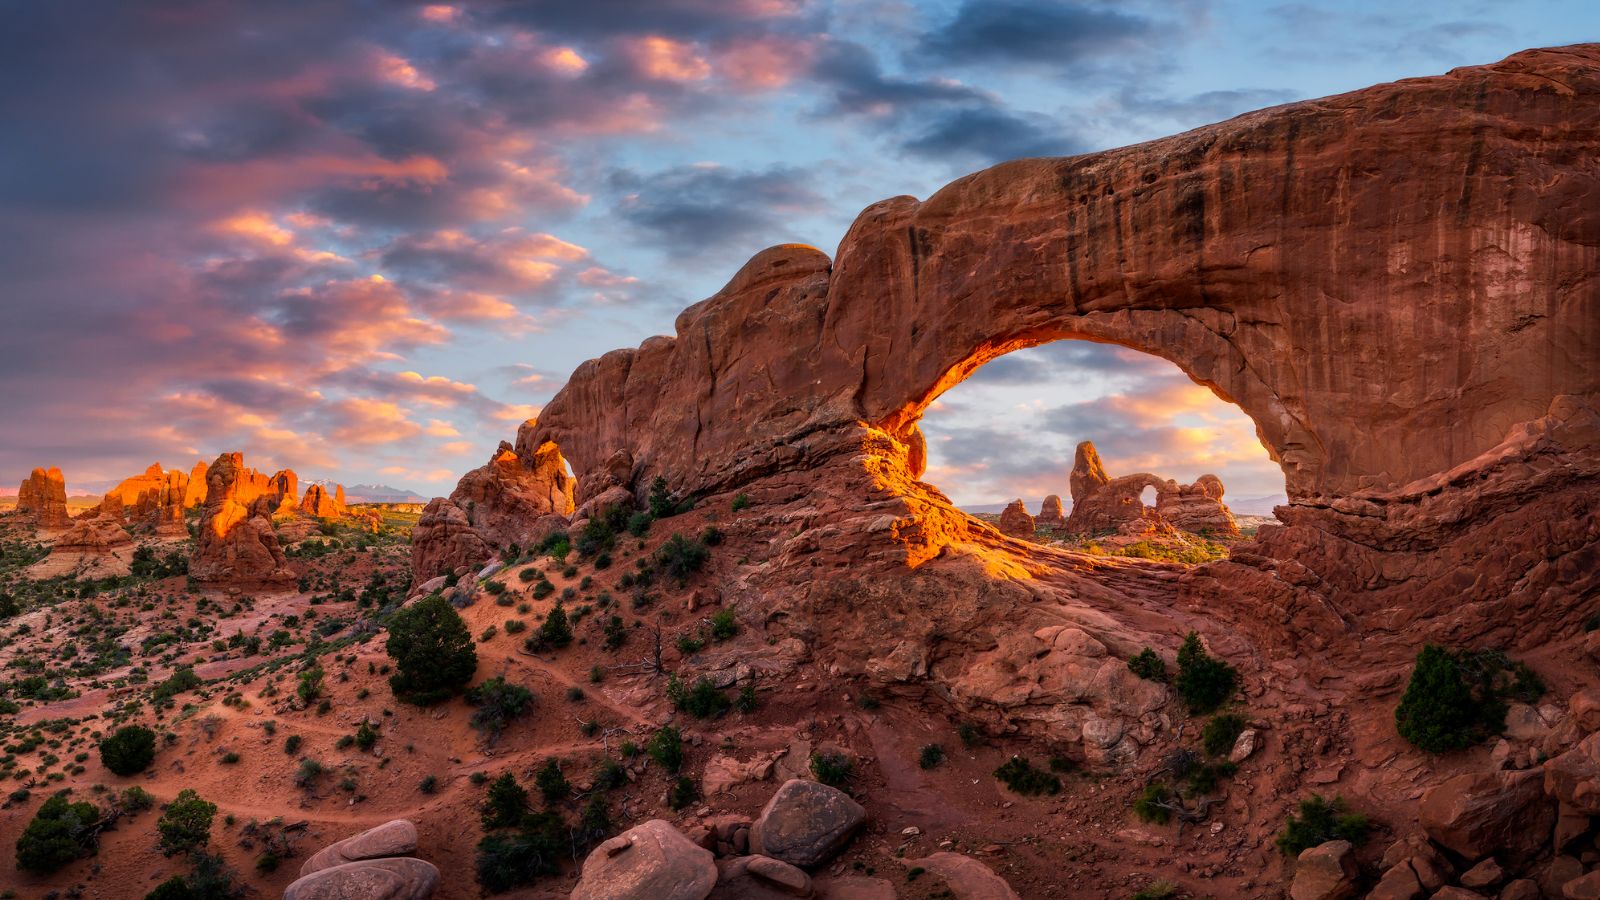 <p>Arches National Park offers visitors over 2,000 natural sandstone arches to discover, including the iconic Delicate Arch and Landscape Arch, the fifth-longest in the world. Driving the scenic park road, visitors will have views of Balanced Rock and the Windows Section.</p>